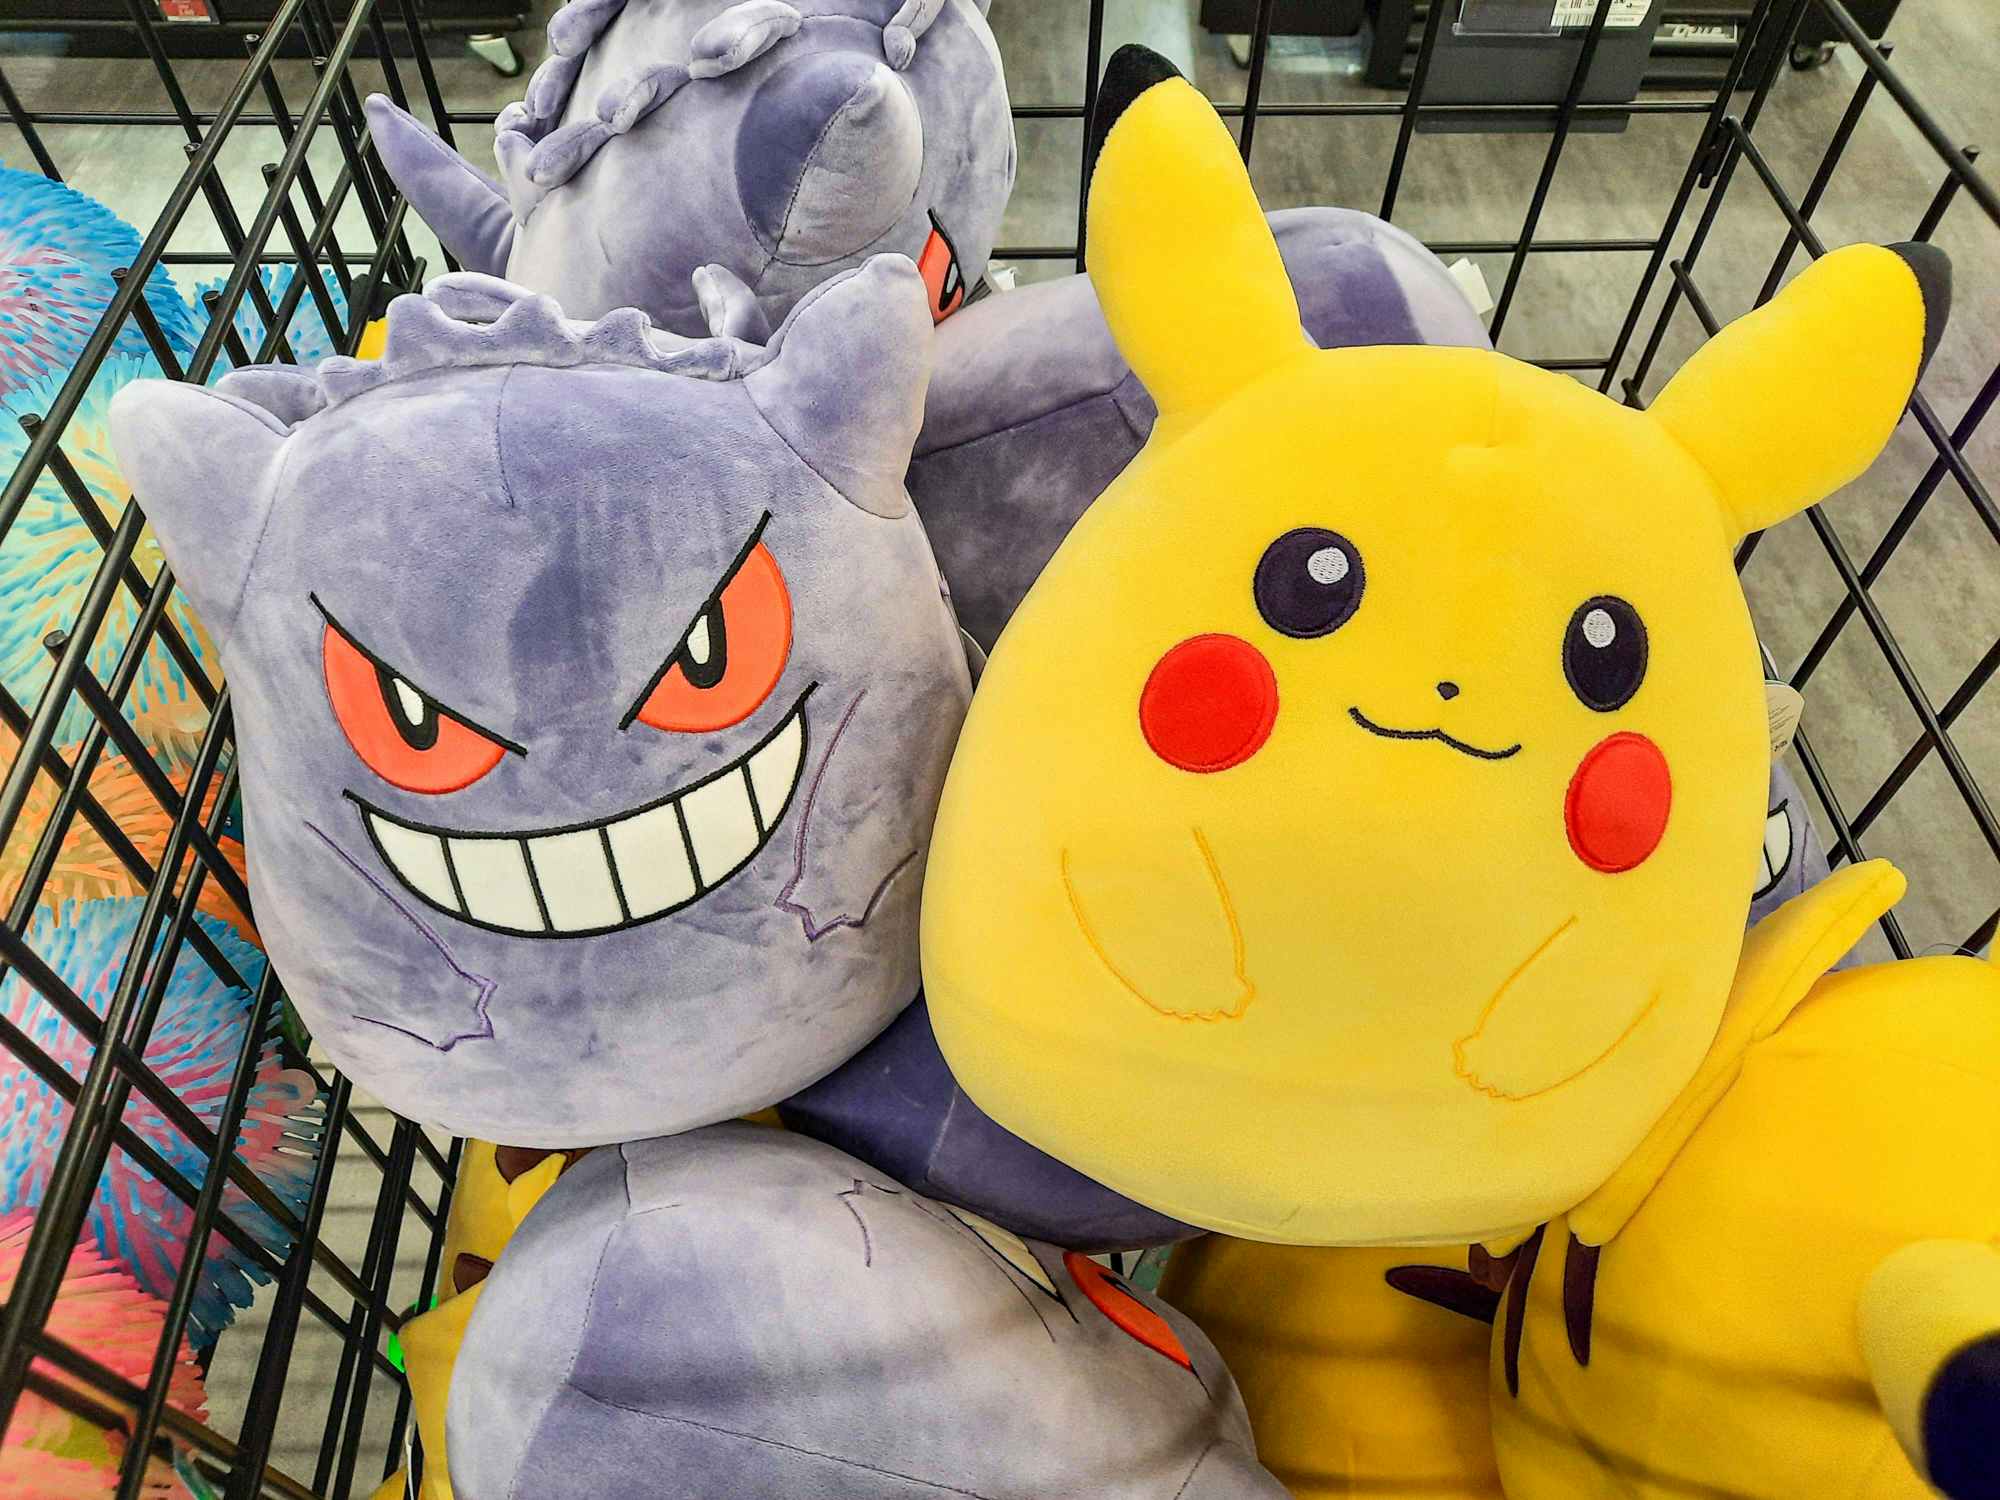 Here Is Every POKÉMON Squishmallow Released So Far